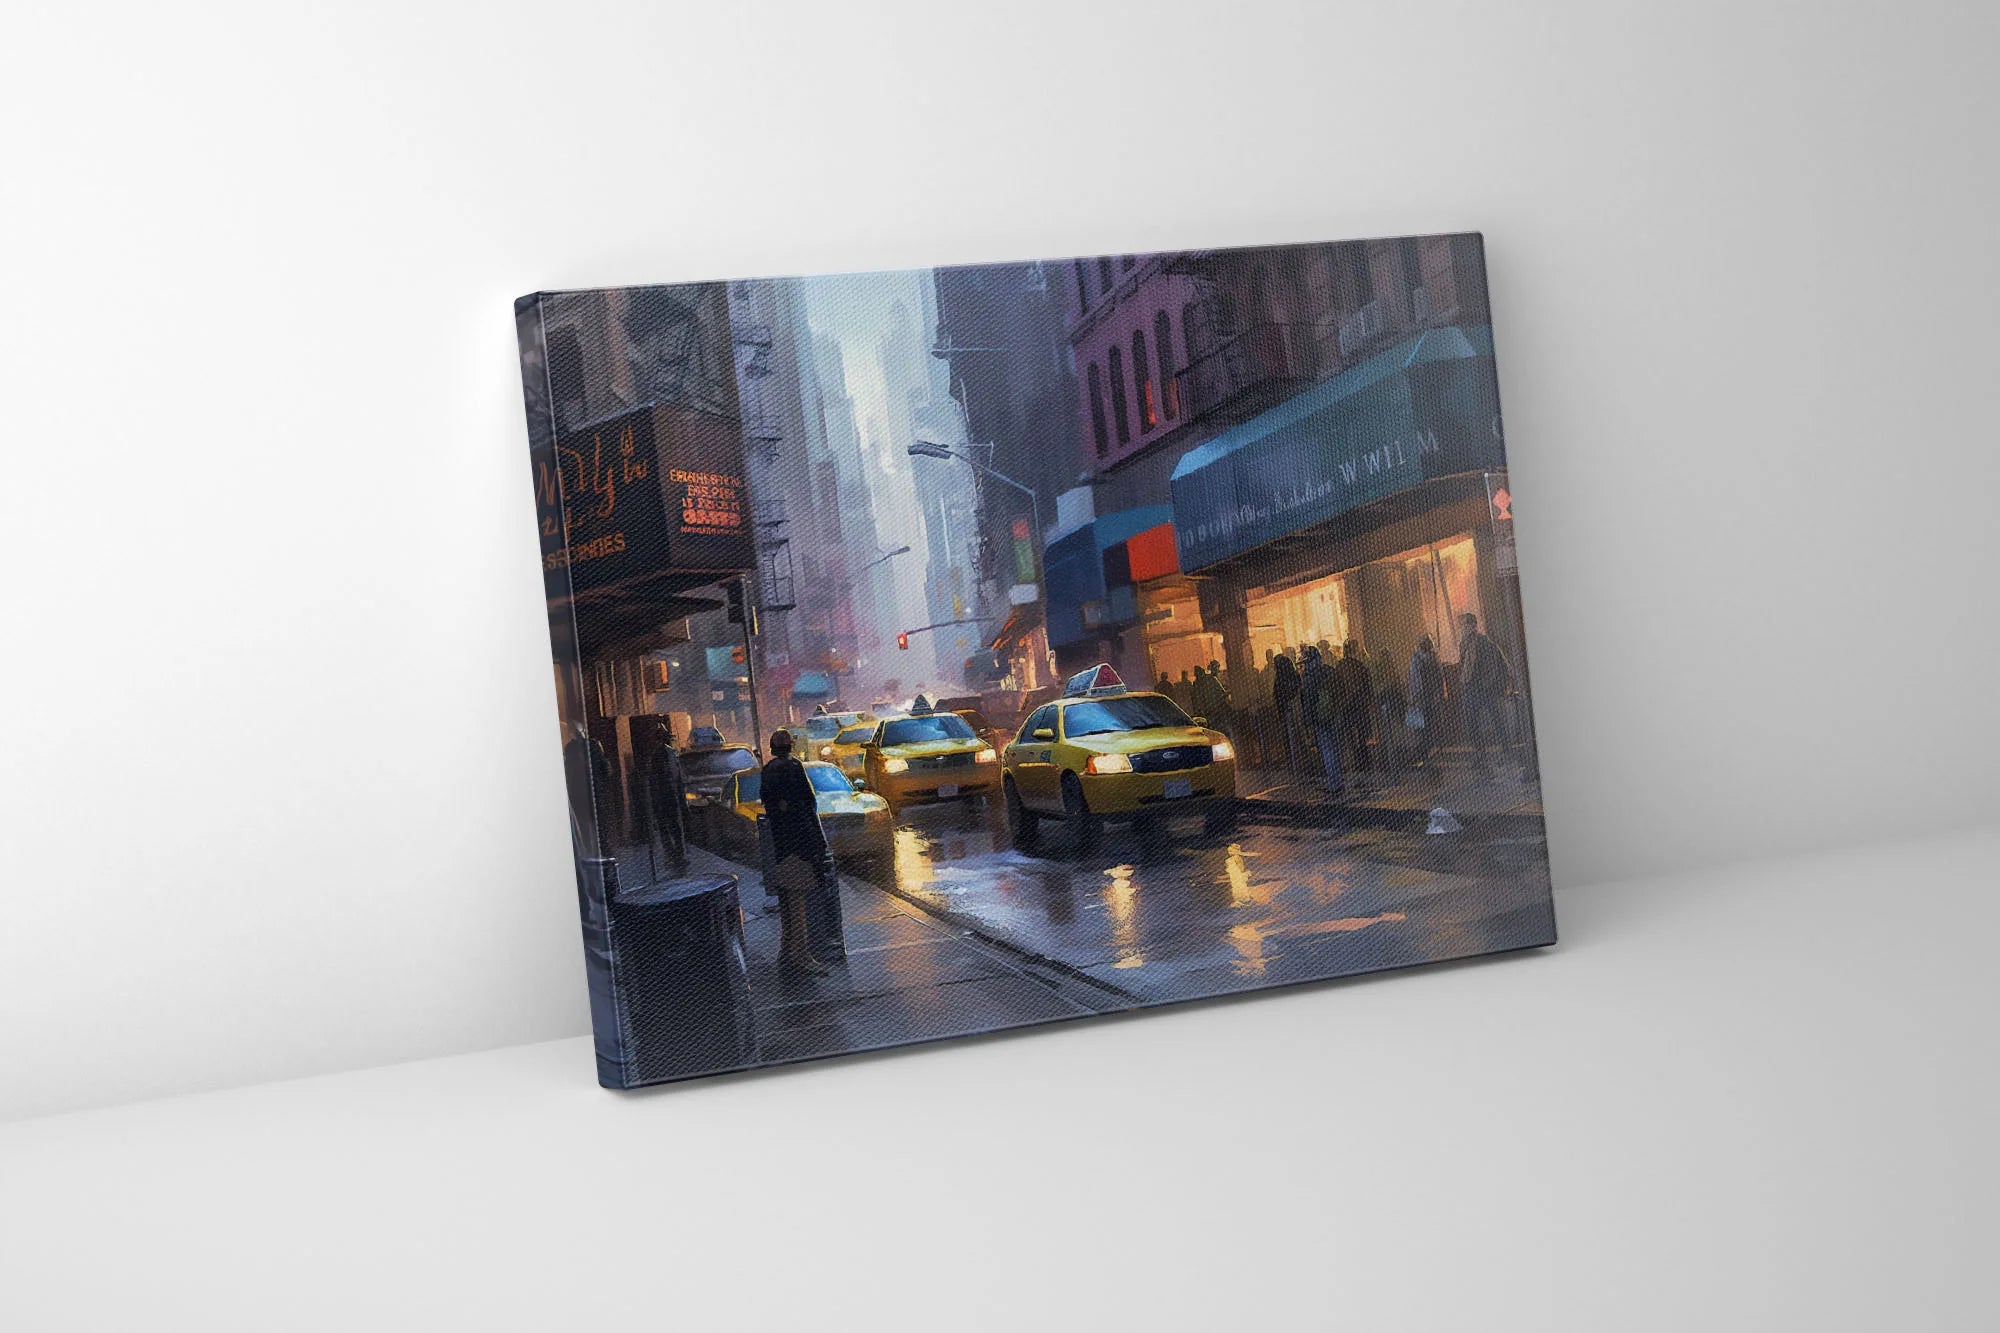 Night Streets Of NYC Canvas Art 36" x 48"